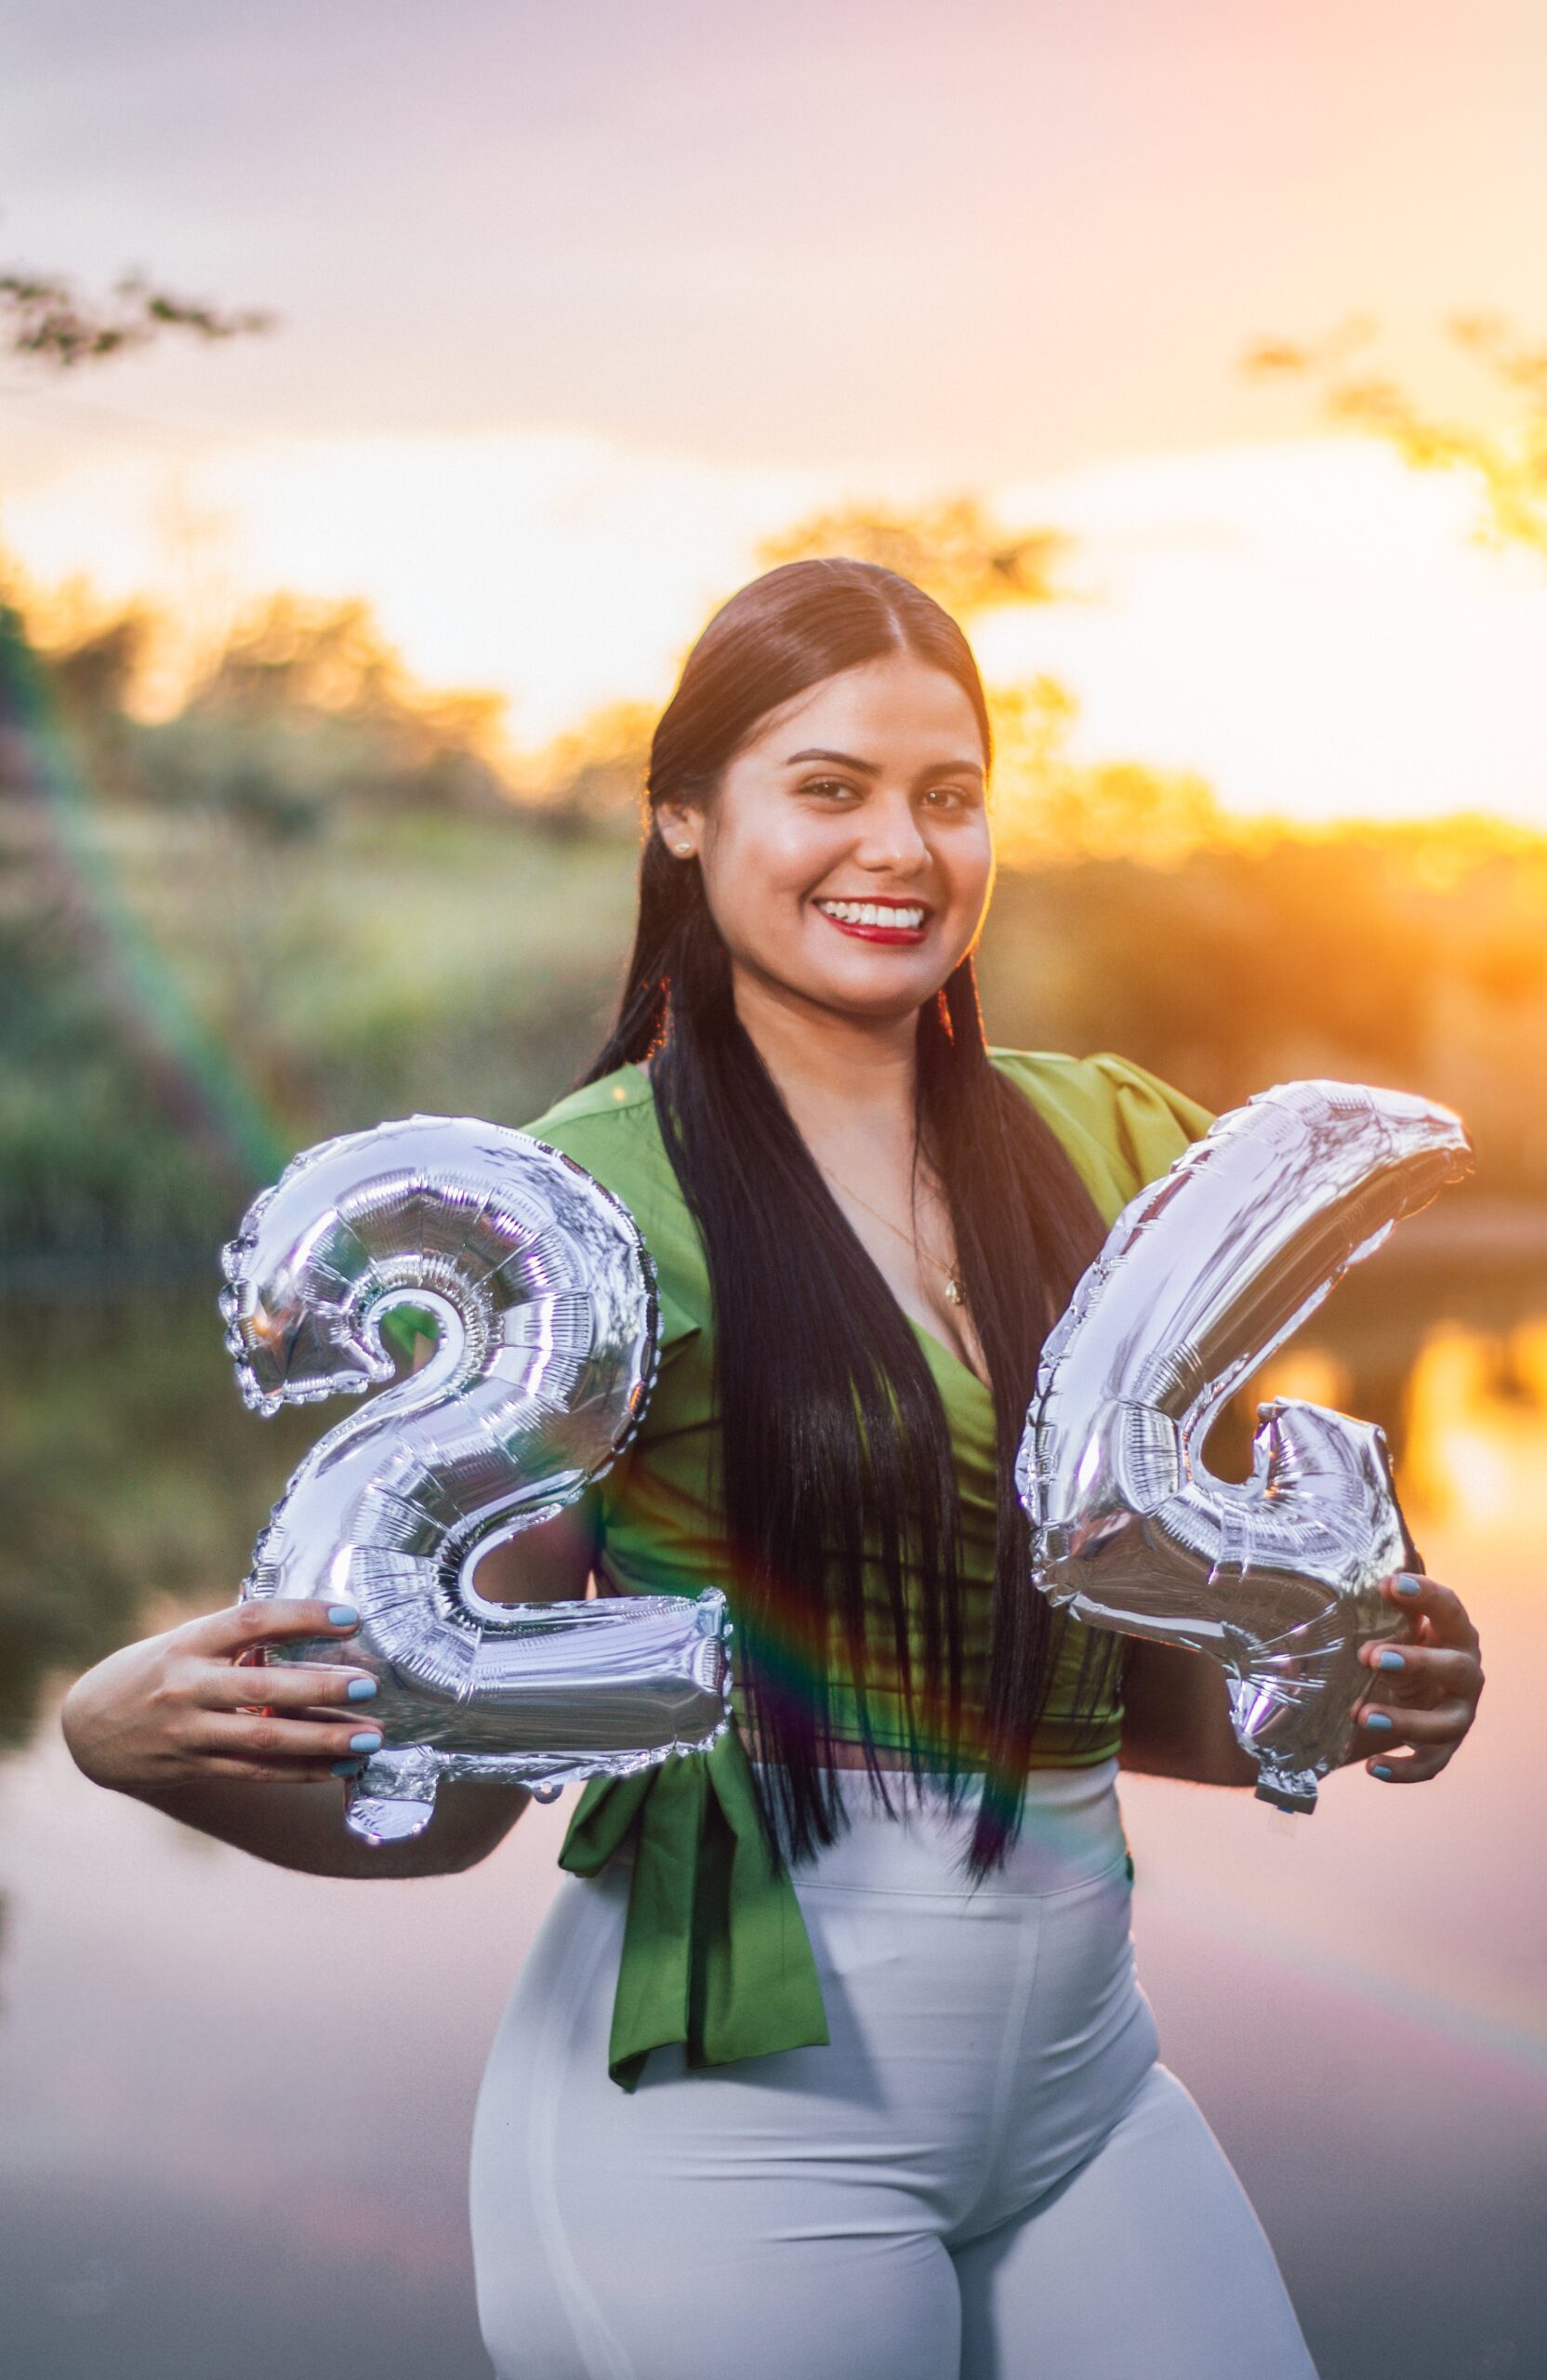 Letter to Daughter on Her 24th Birthday